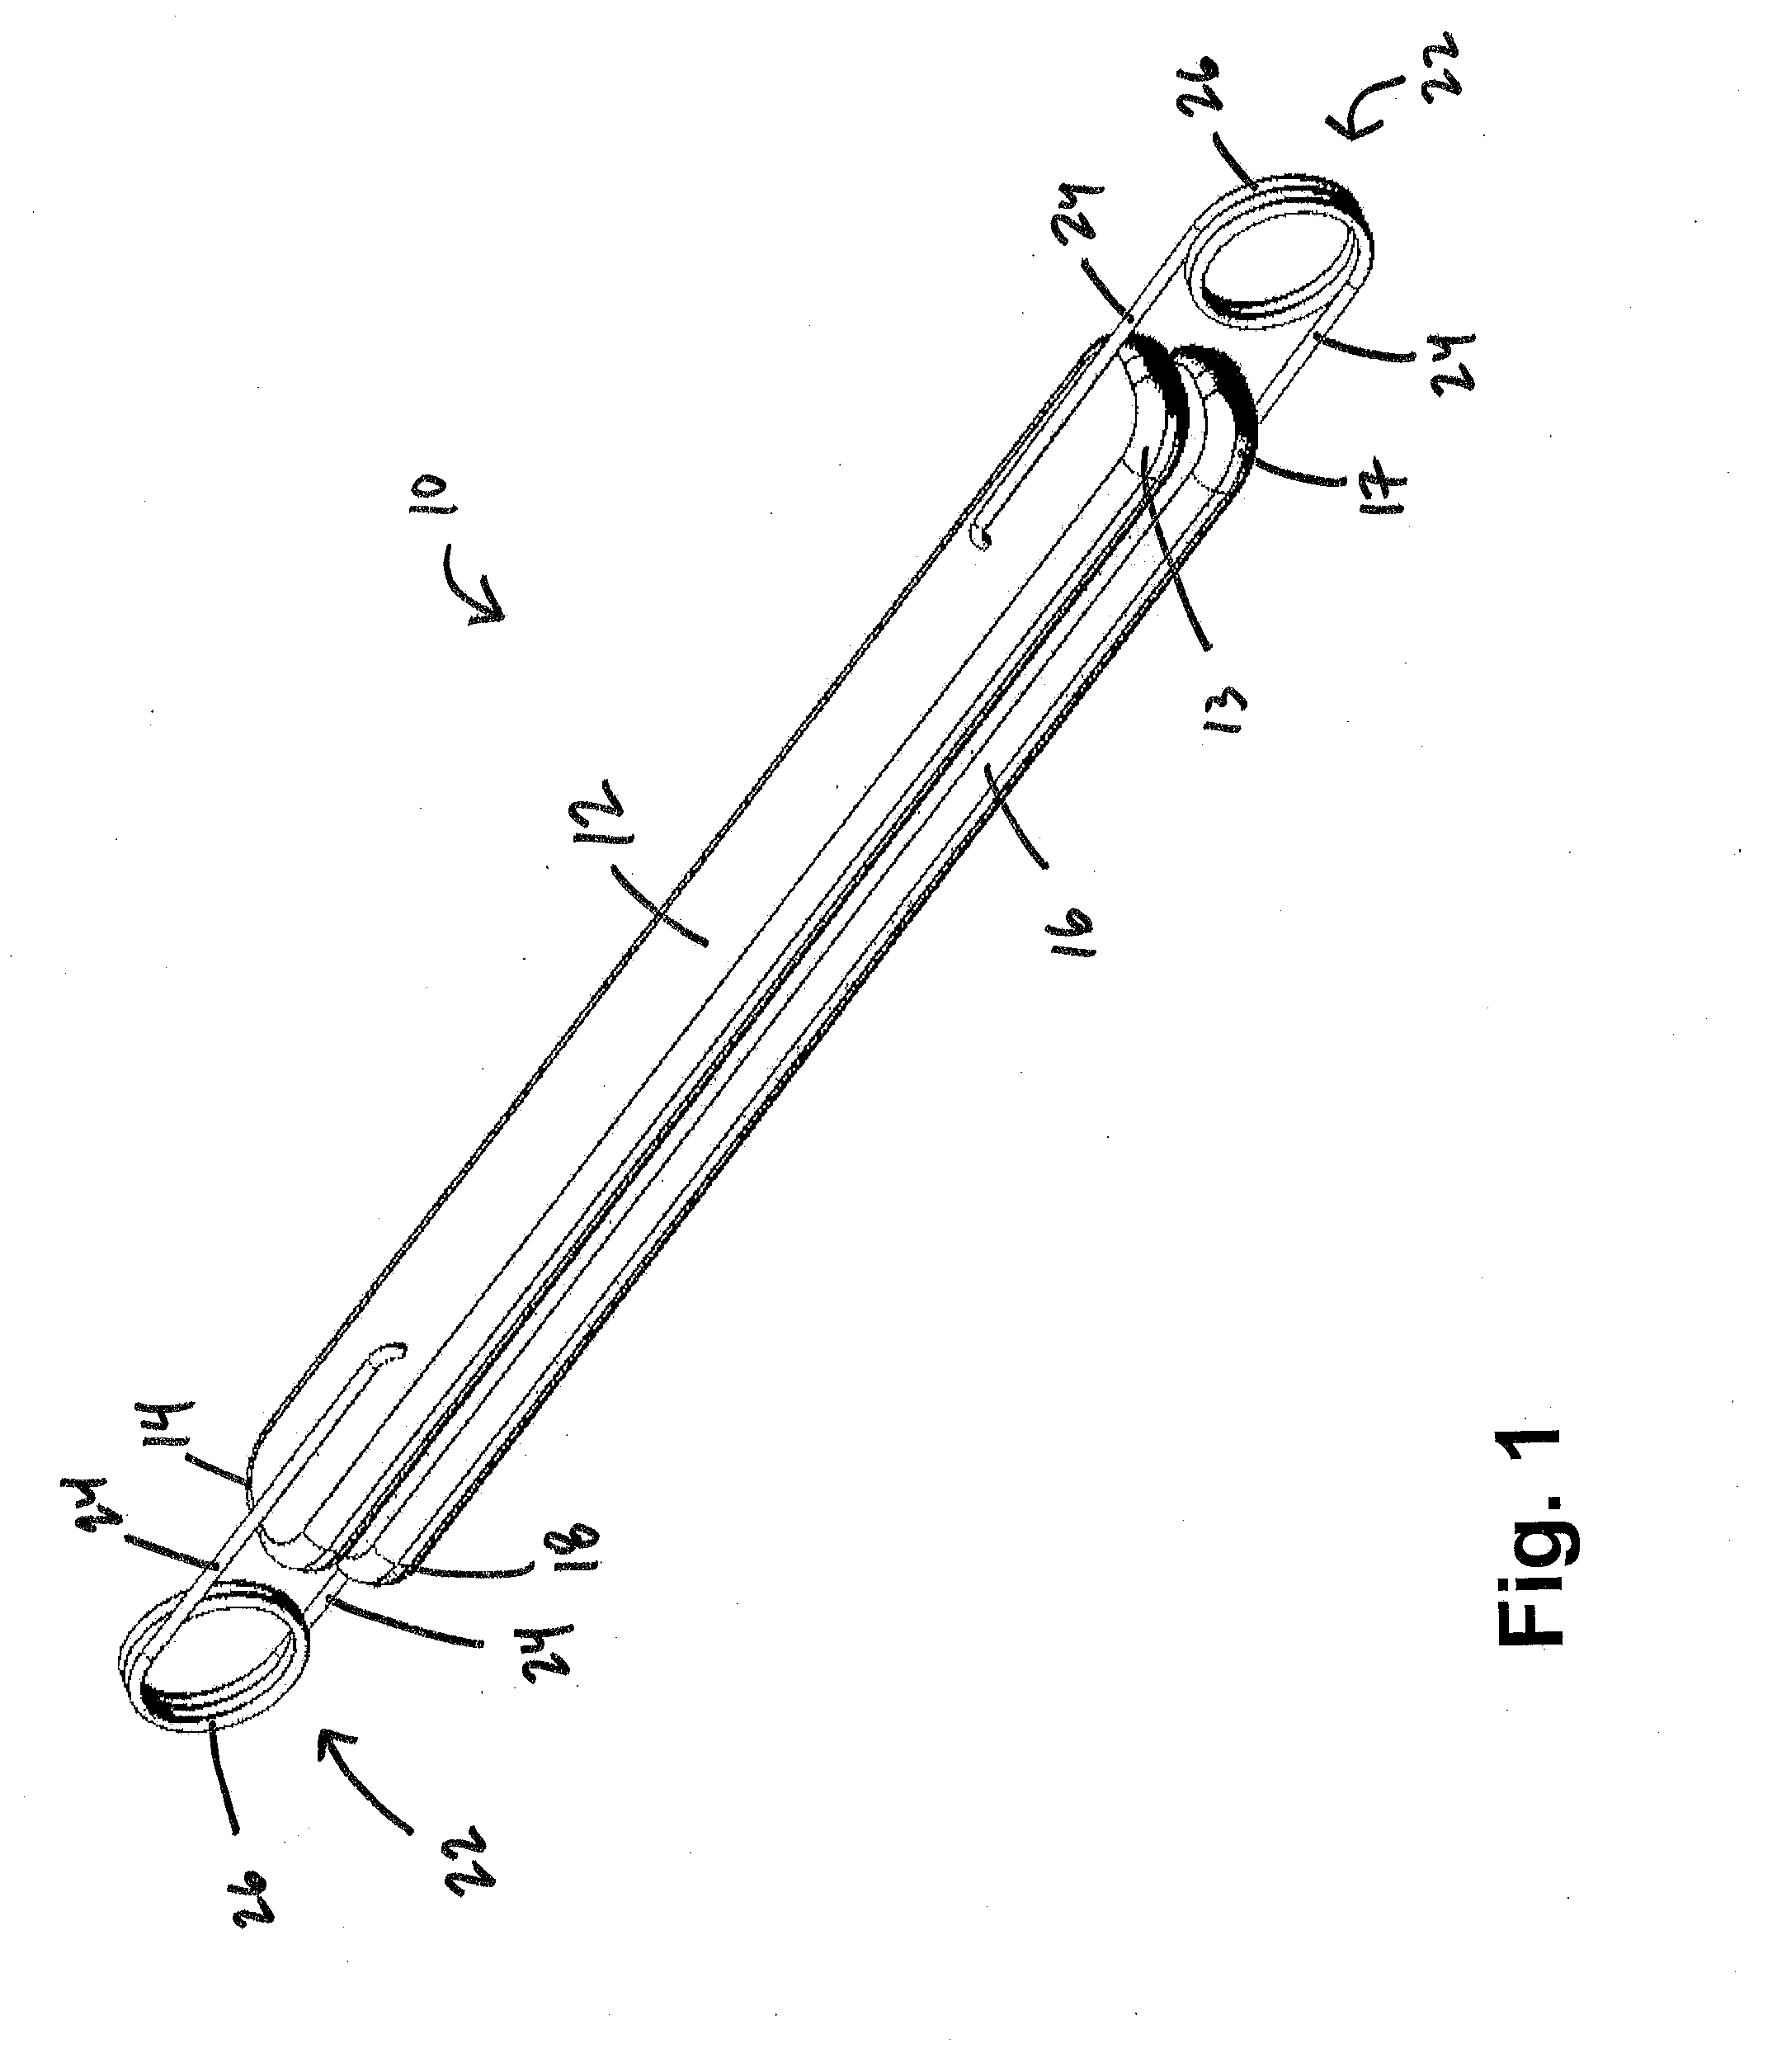 Tissue restoration devices, systems, and methods